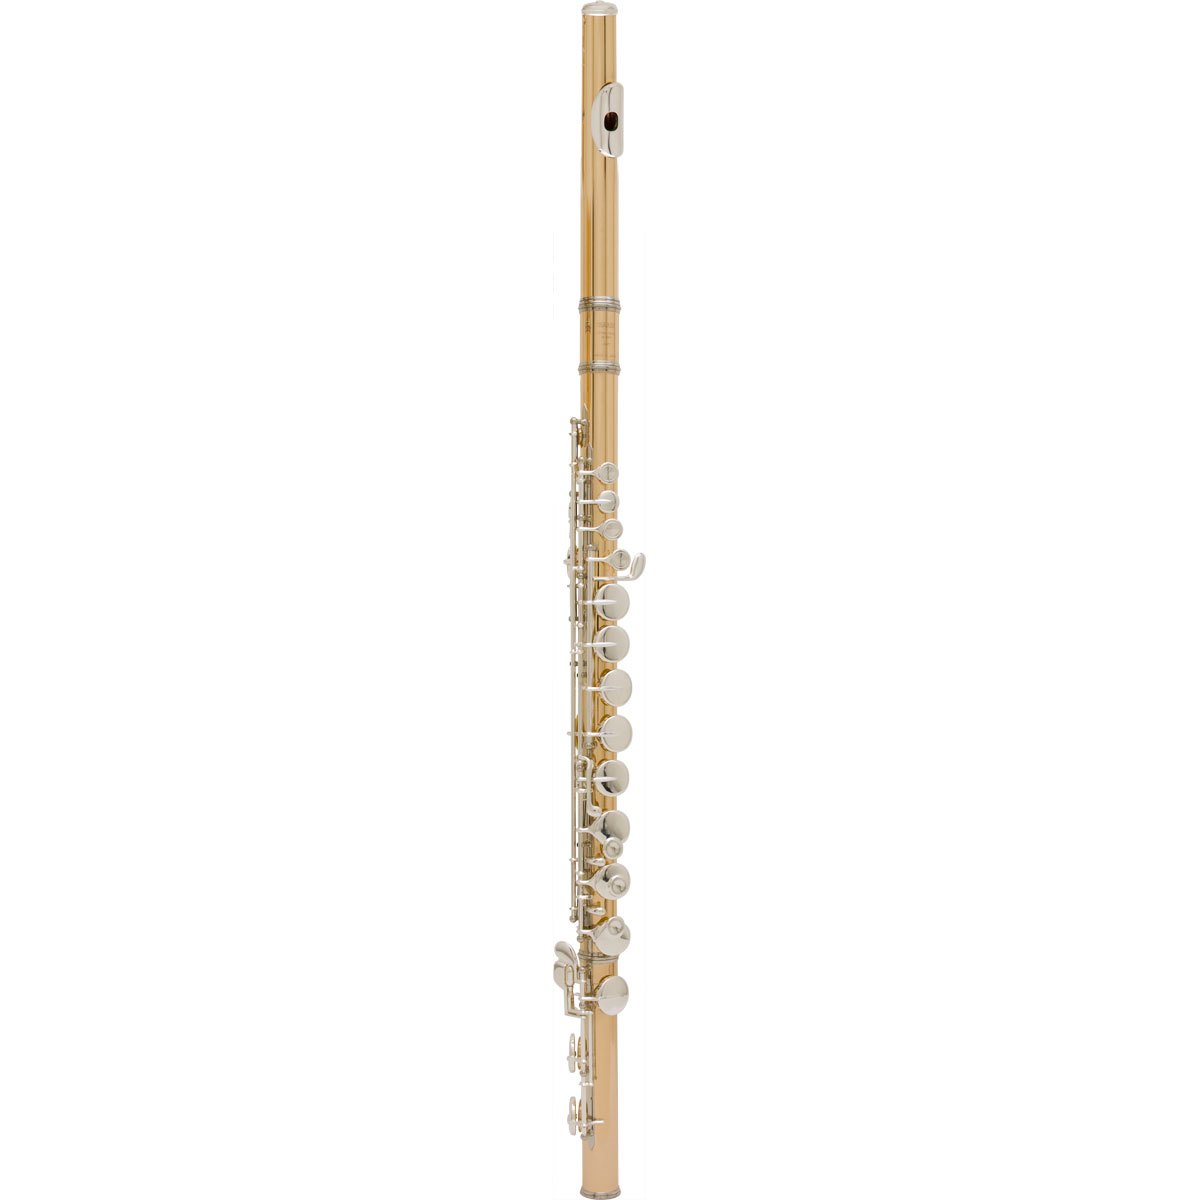 YFL-A421UII/A421BII - Features - Flutes - Brass & Woodwinds - Musical Instruments - Products - Yamaha - United States